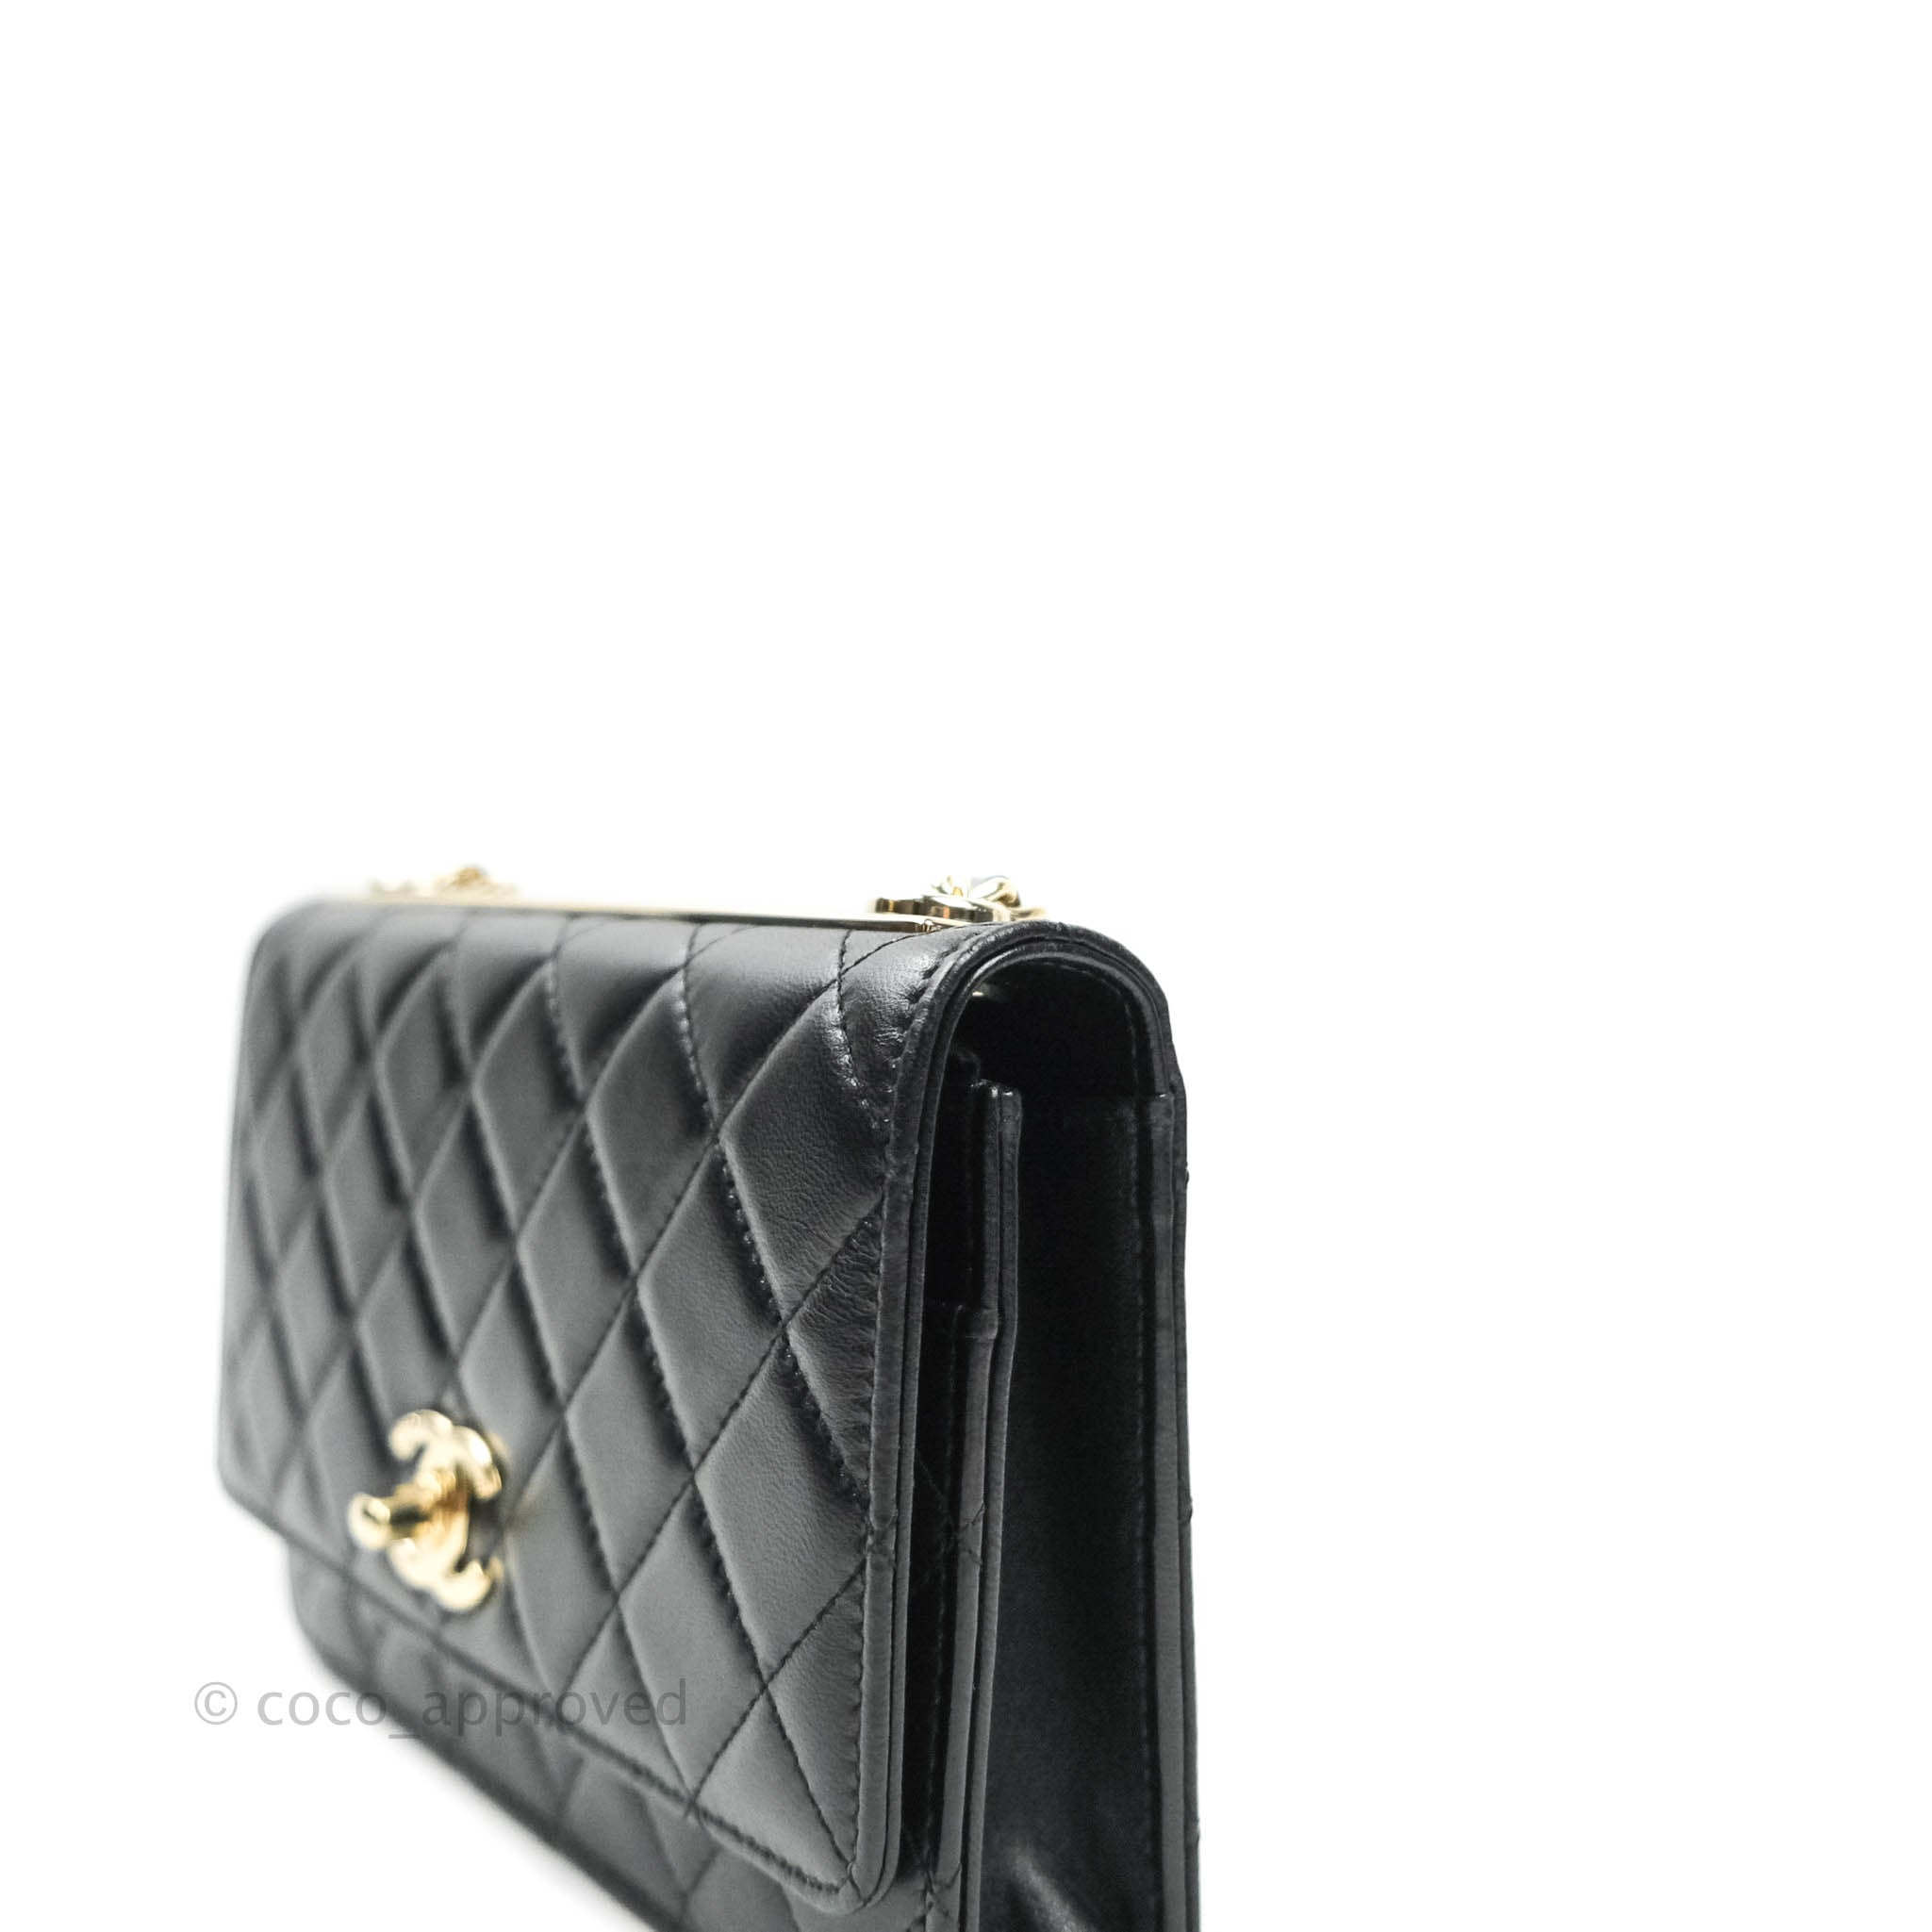 Chanel Trendy CC WOC Wallet on Chain Chevron Navy Lambskin Gold Hardwa –  Coco Approved Studio